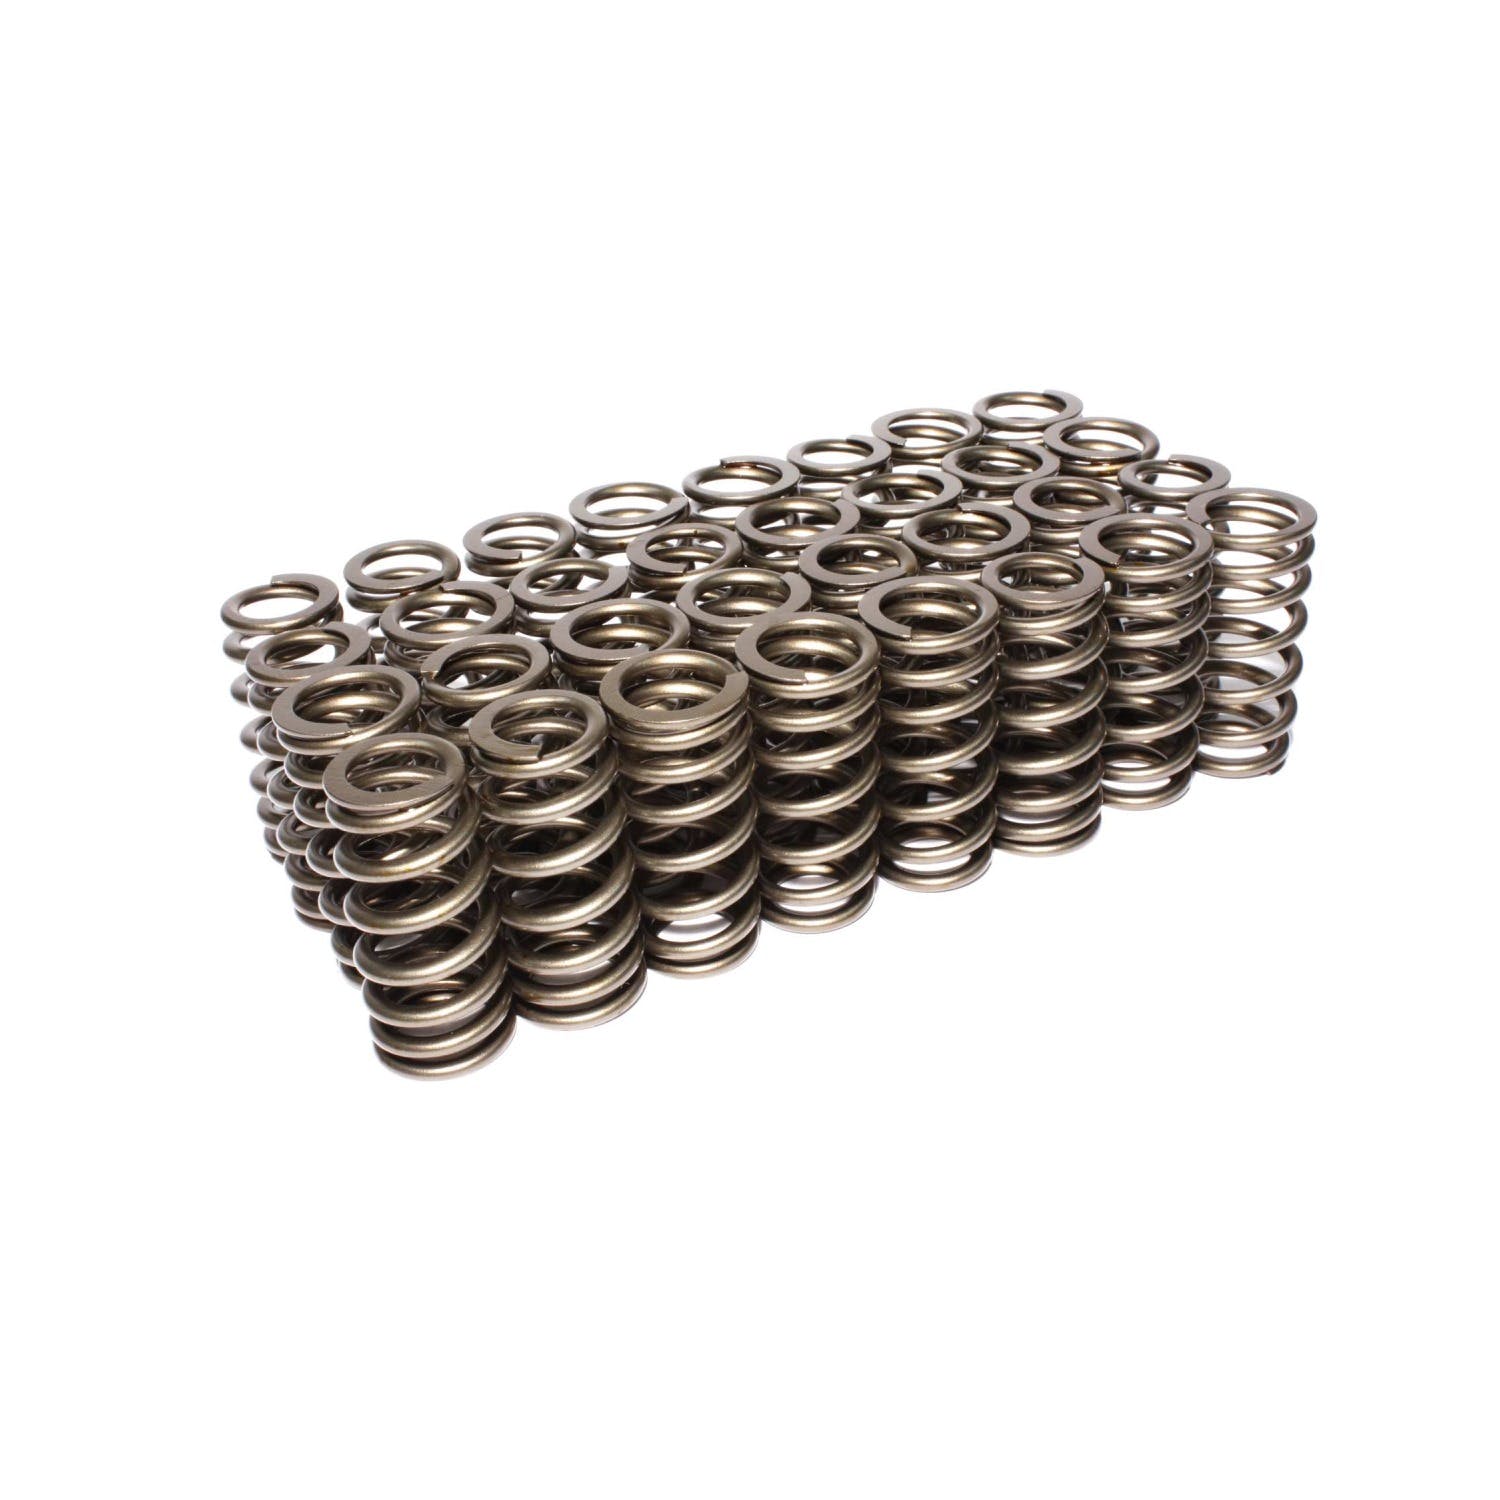 Competition Cams 26125-32 High Load Beehive Valve Spring